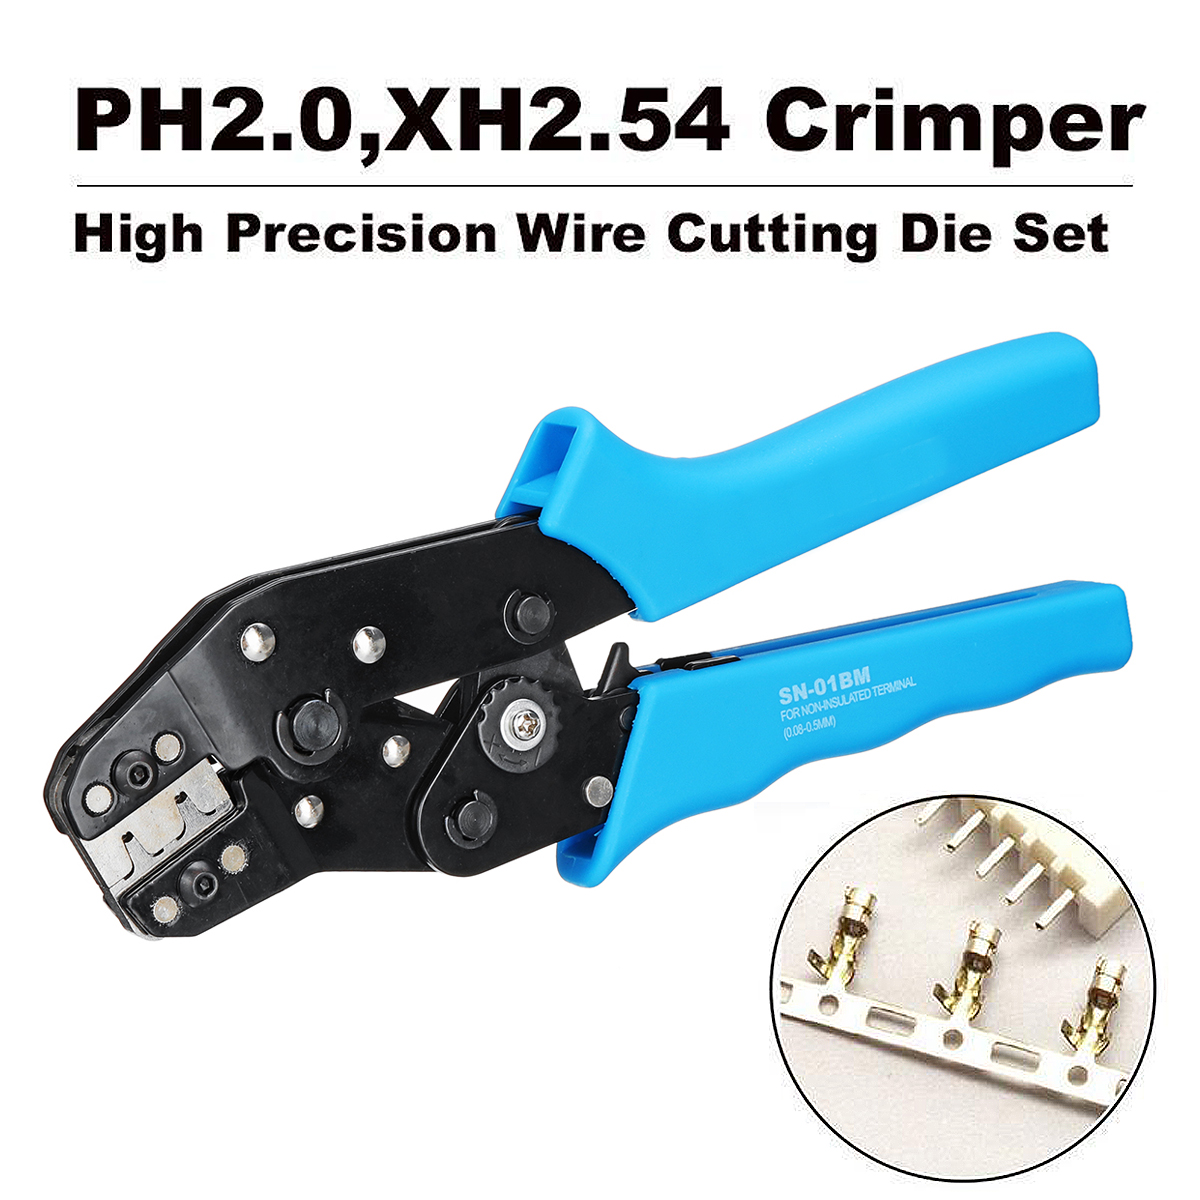 SN-01BM AWG28-20 Self-adjusting Terminal Wire Cable Crimping Pliers Tool for Dupont PH2.0 XH2.54 KF2510 JST Molex D-SUB Terminal 122